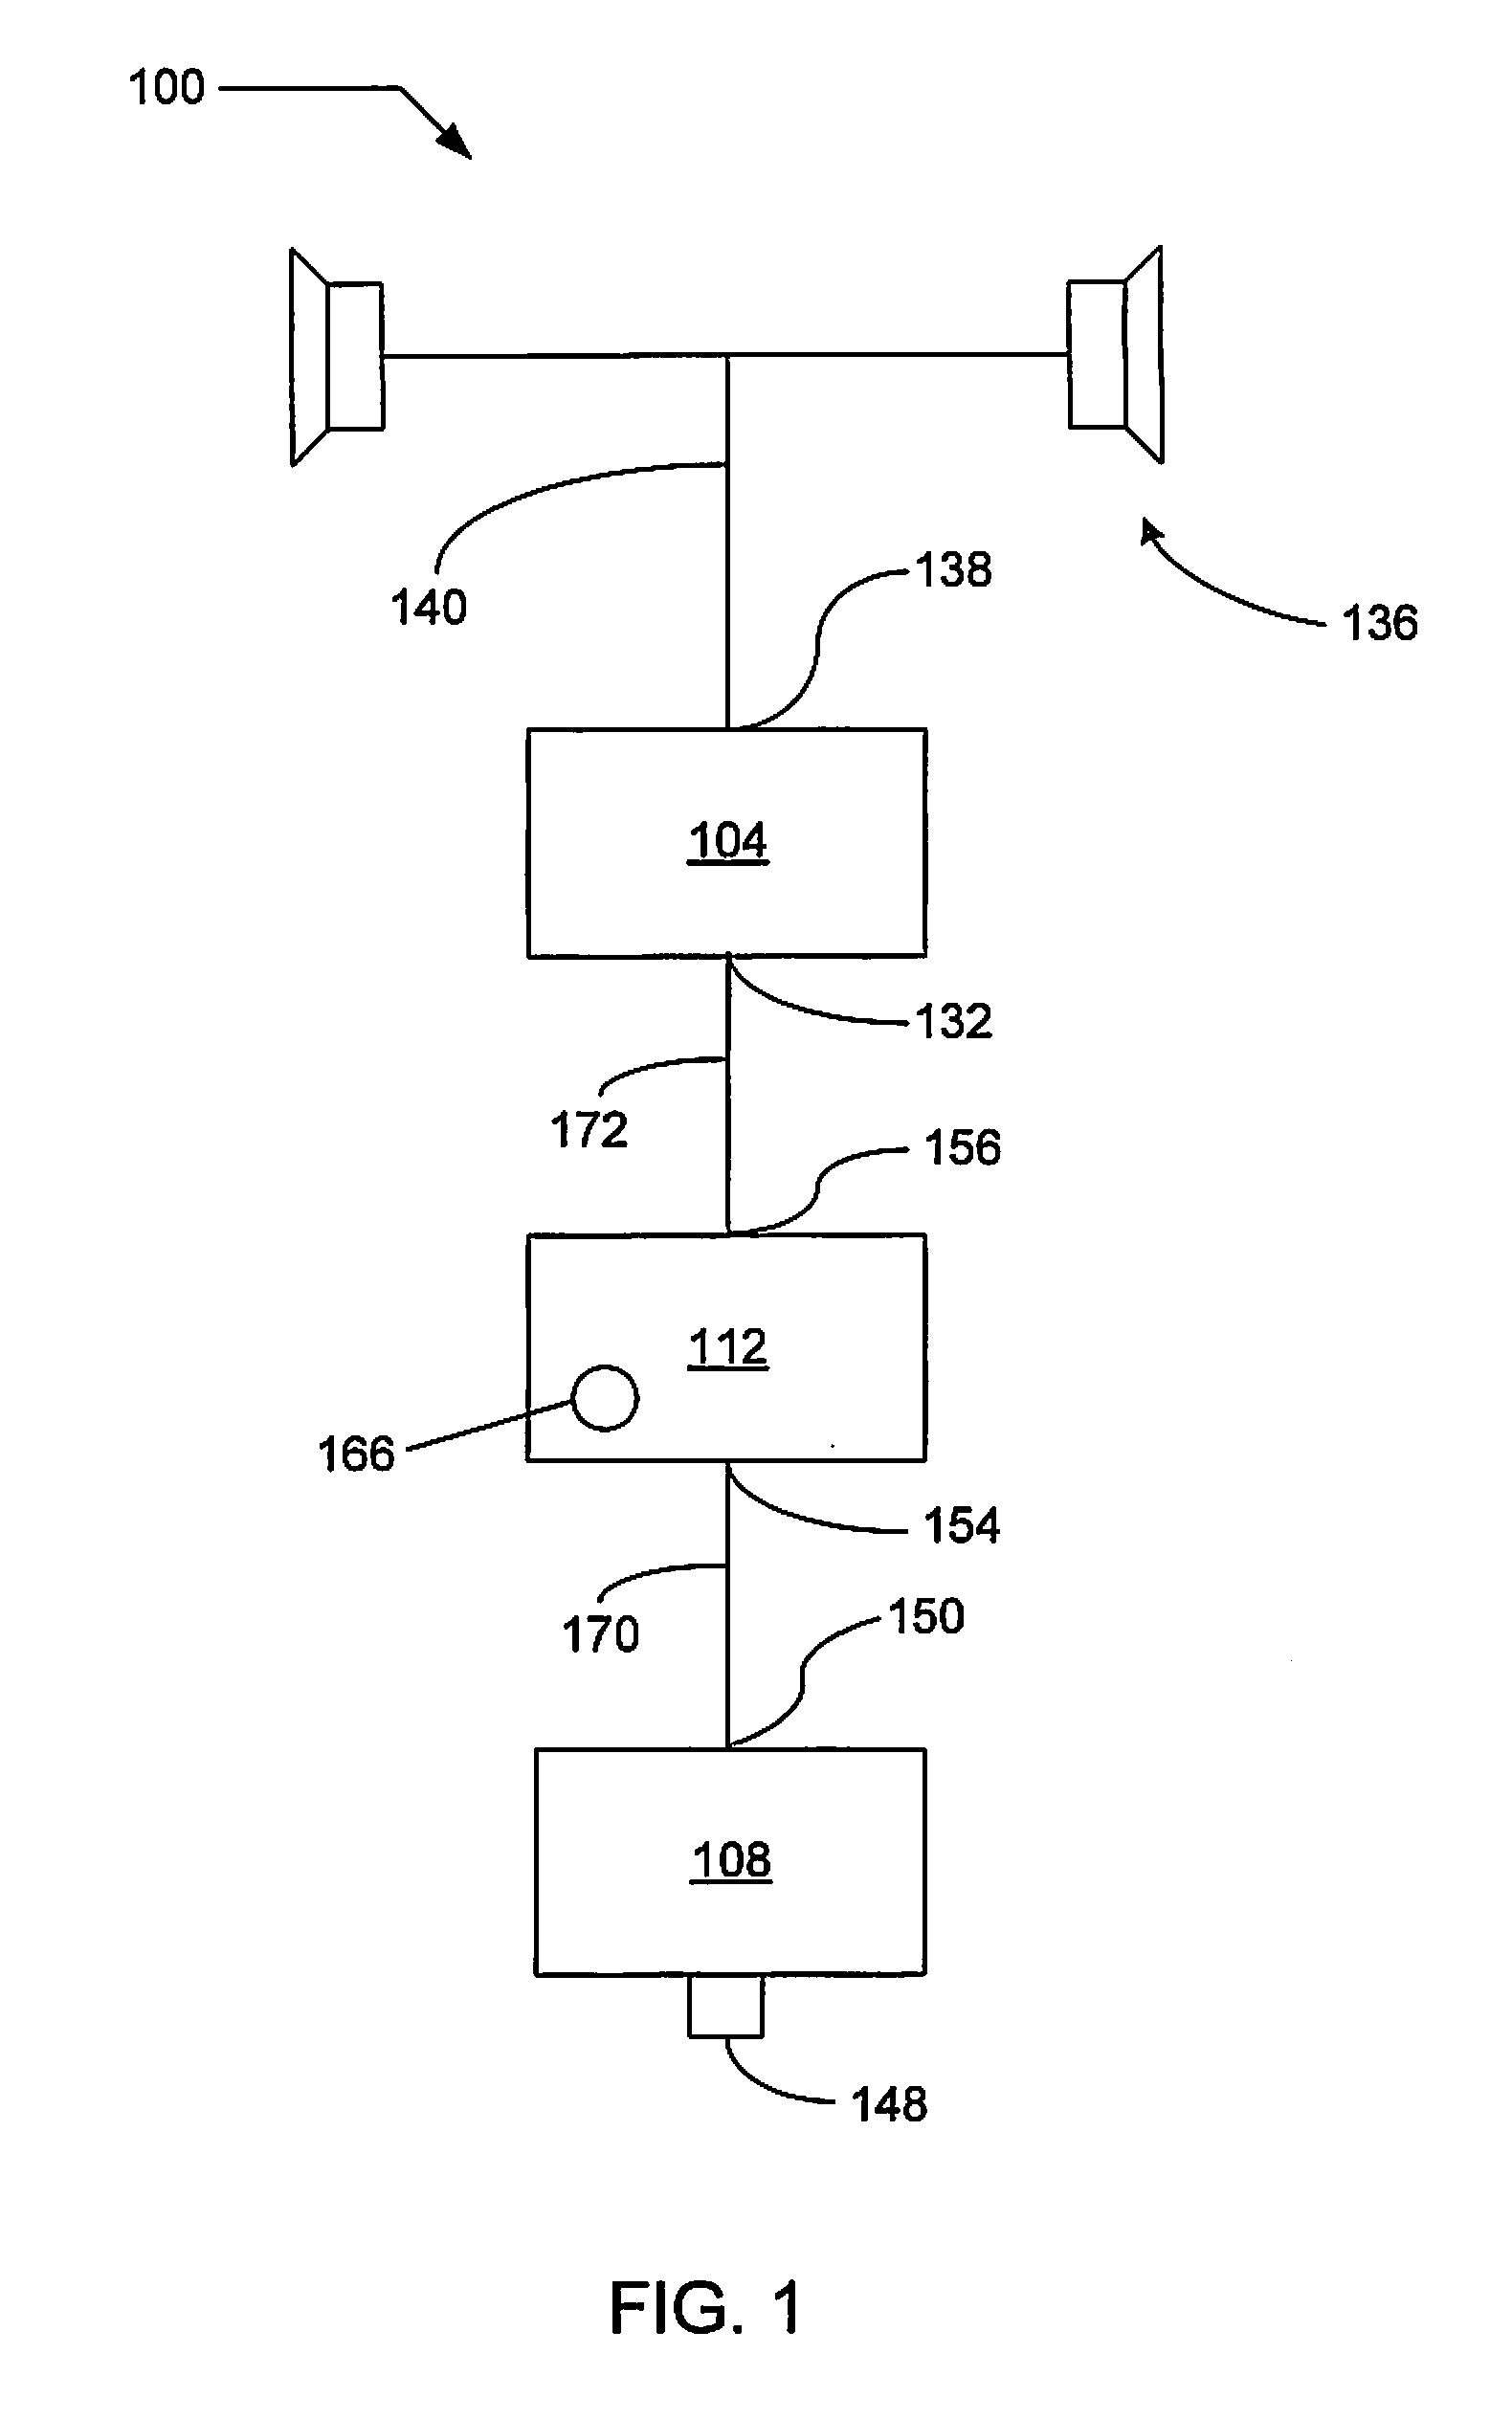 Audio System with Portable Audio Enhancement Device